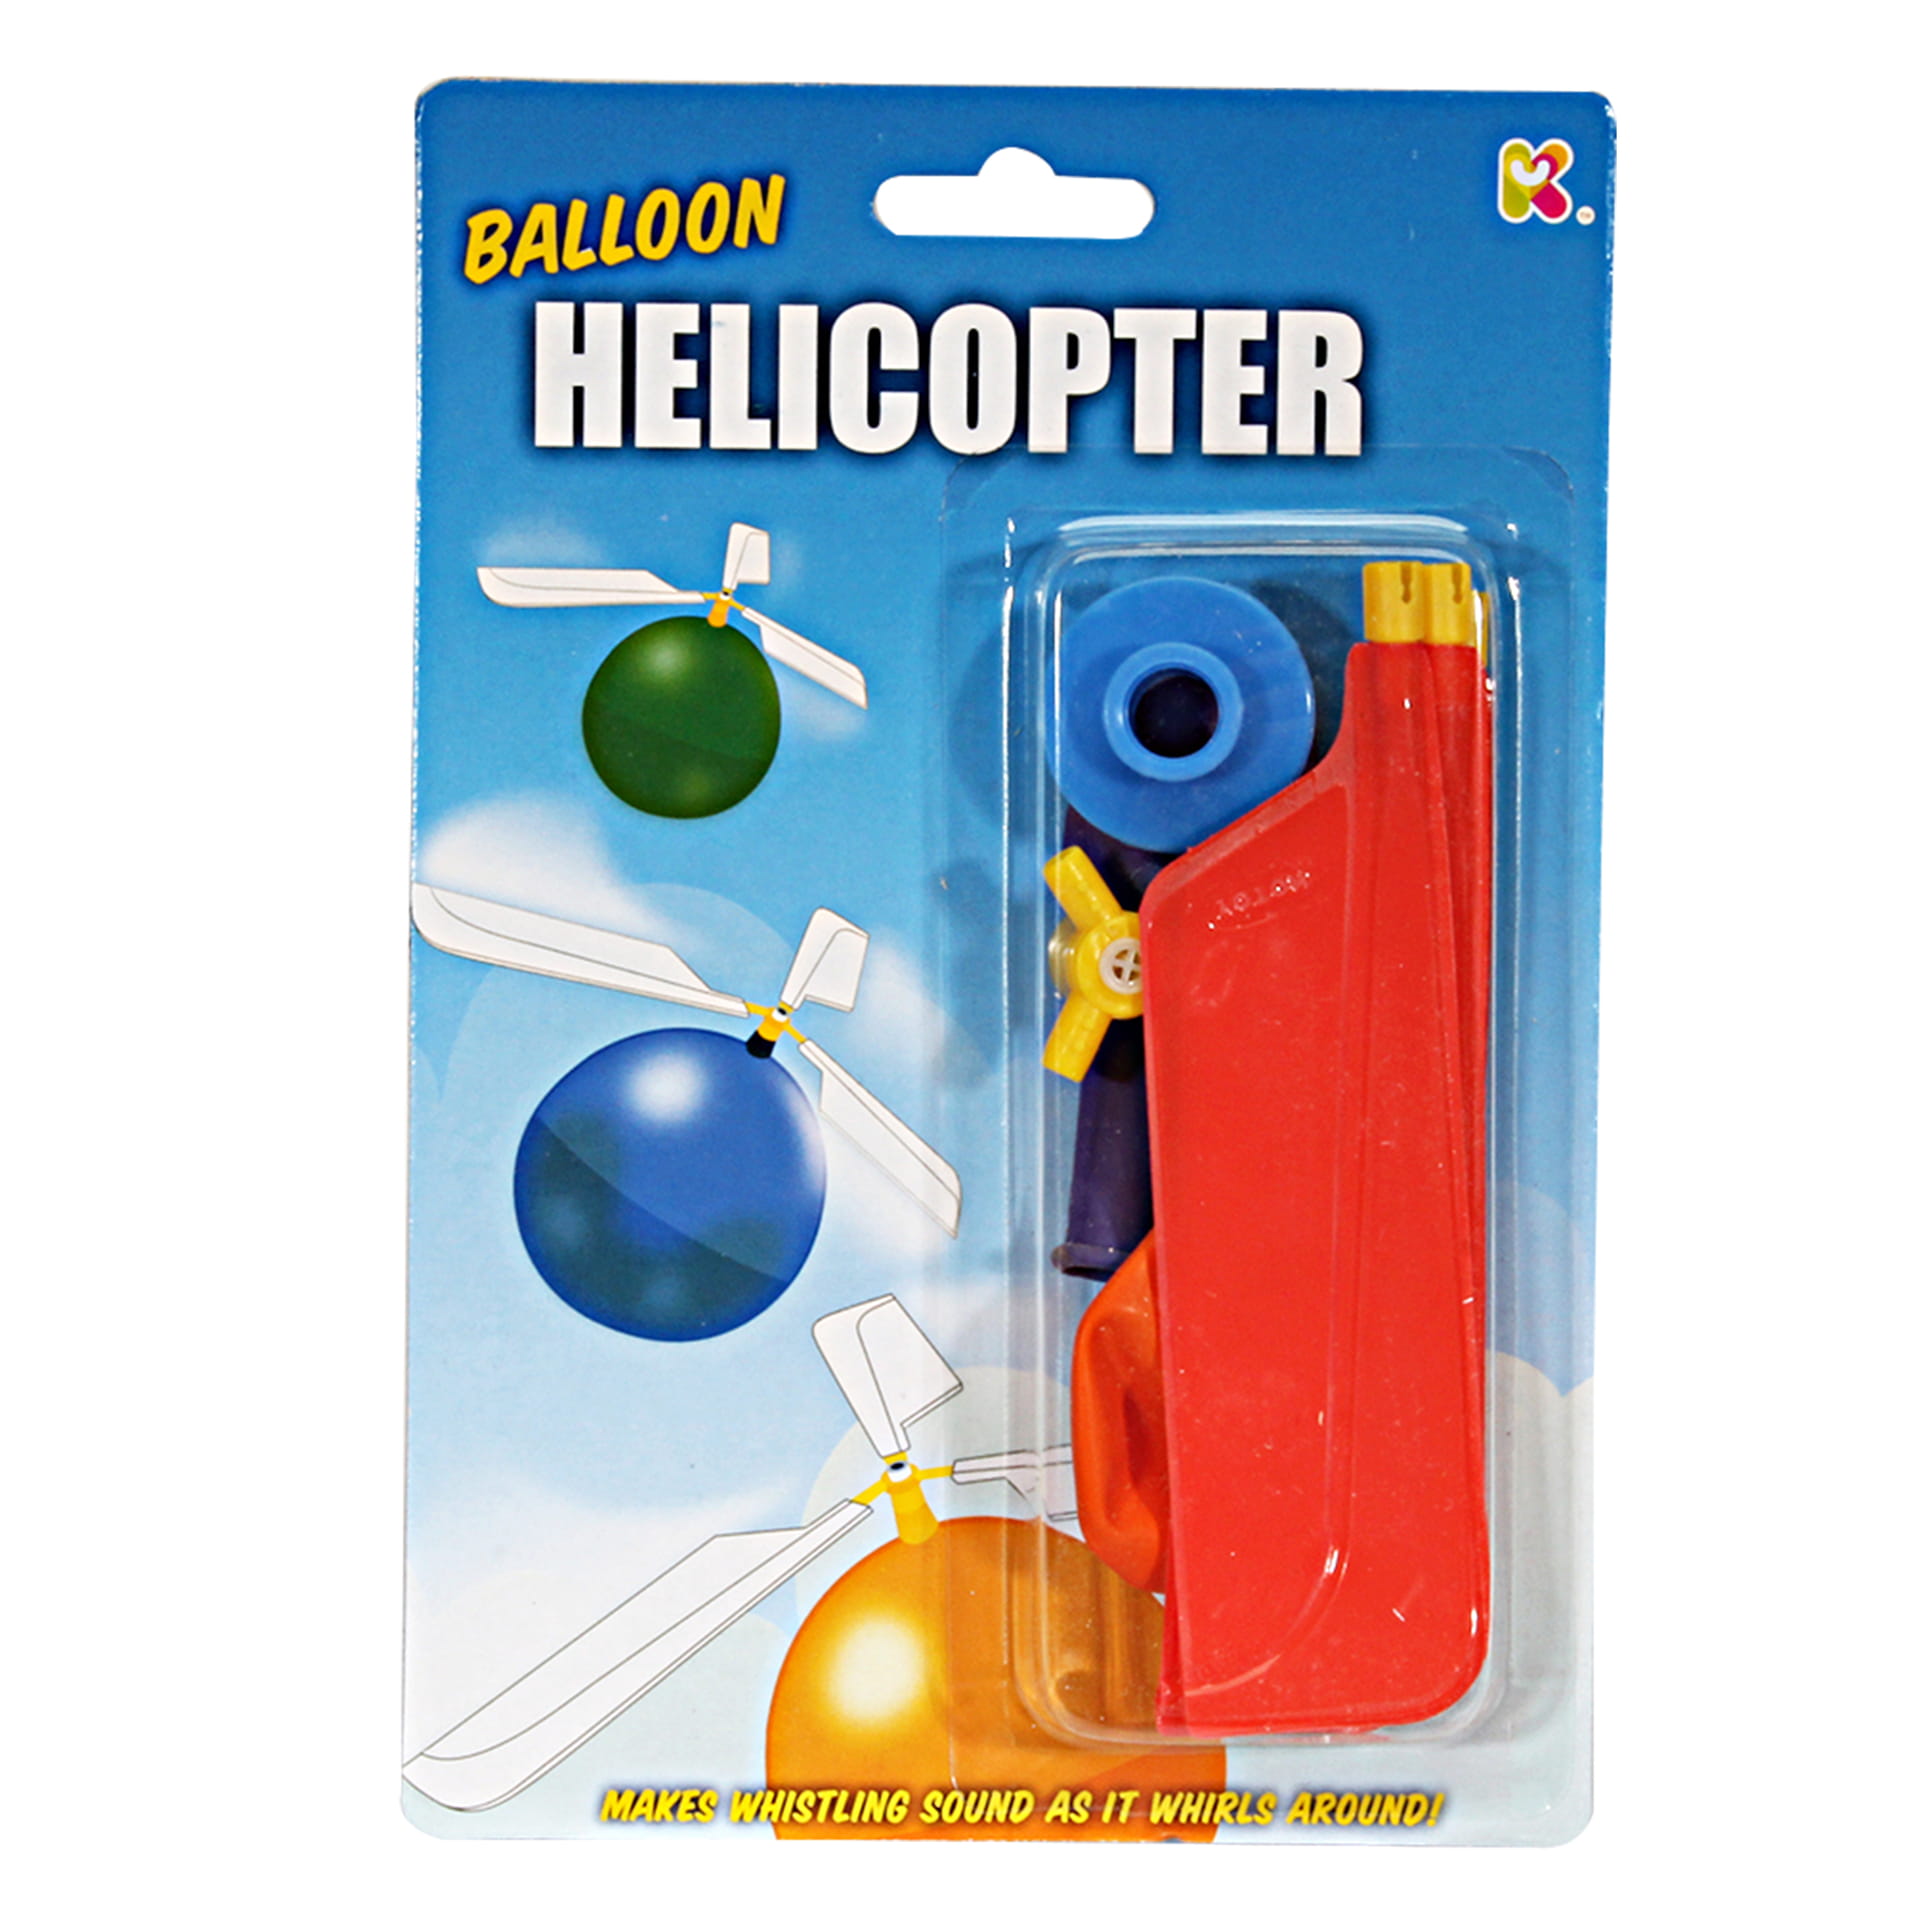 Helicopter Balloon